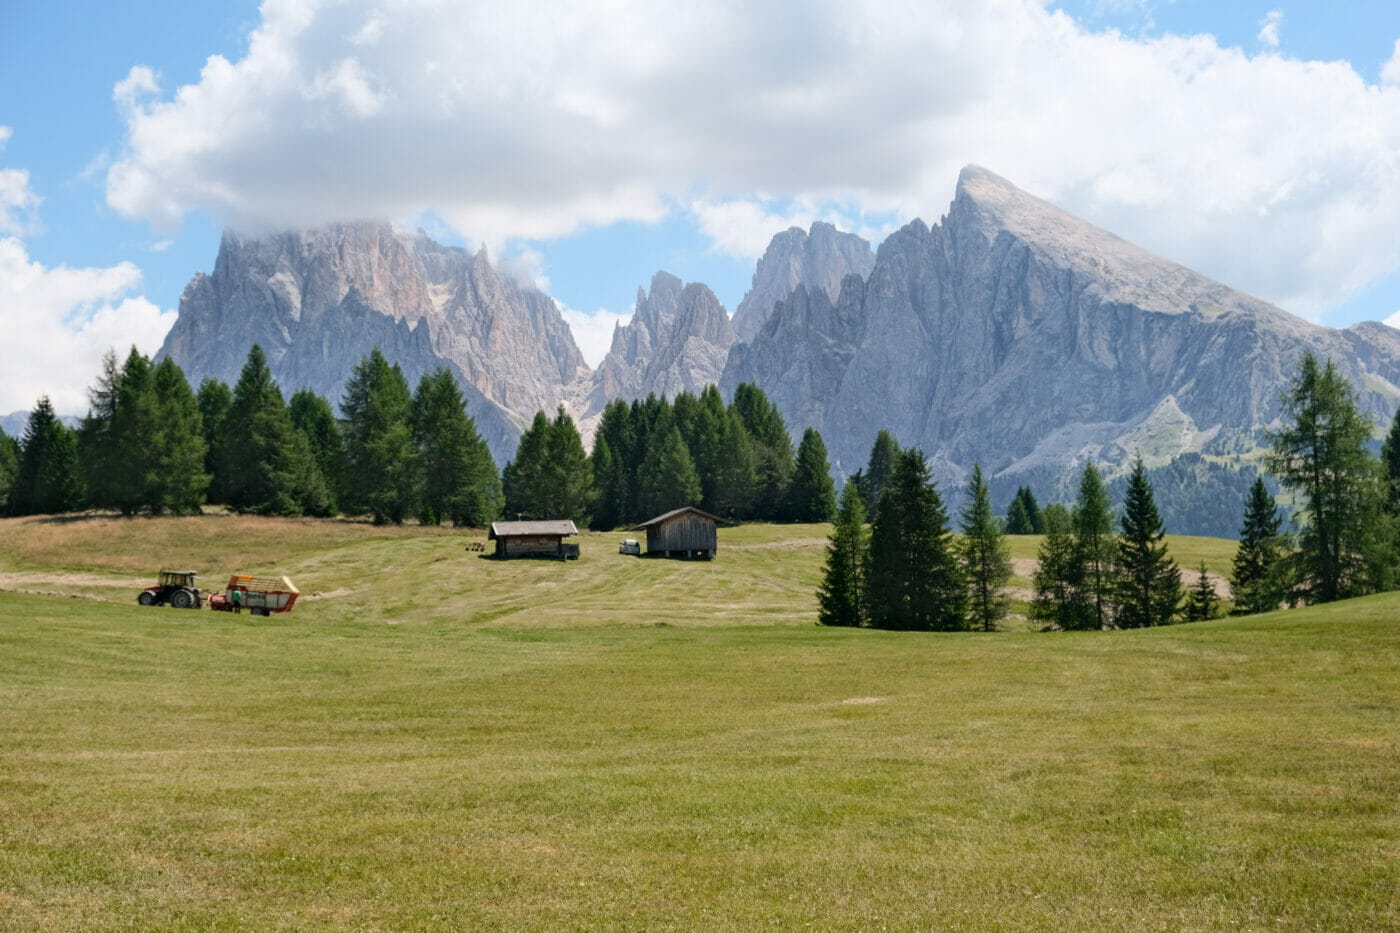 view of the Odle peaks from Alpe di Siusi meadows in the Dolomites